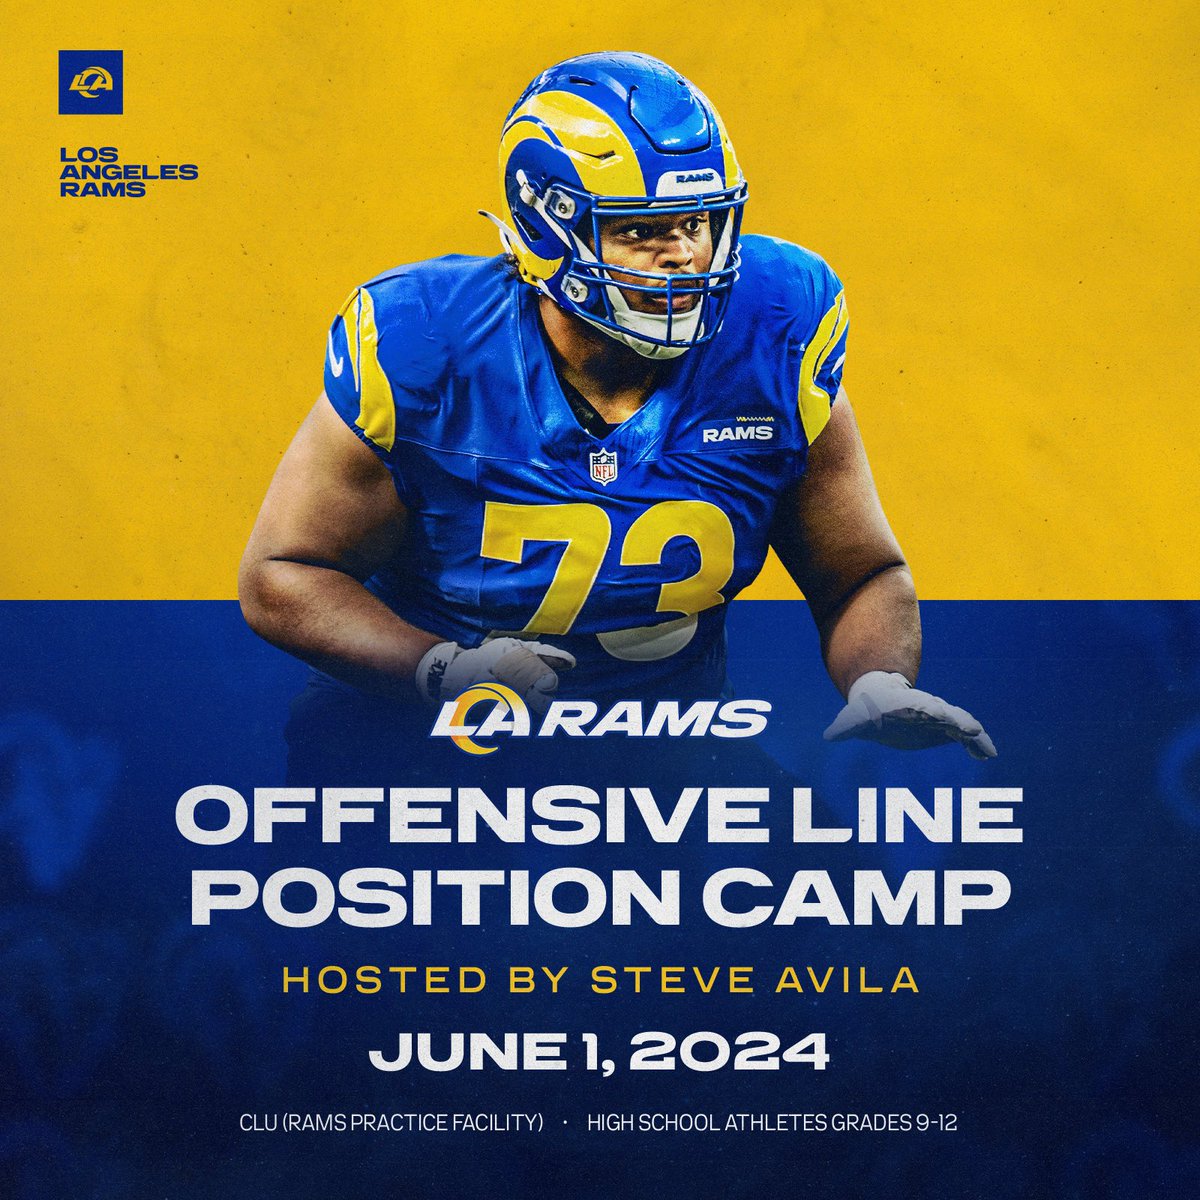 🚨 NEW DATE! @Stevelavila x @RamsNFL Offensive Line Position Camp on Saturday, June 1st at the Rams Practice Facility! » bit.ly/4dngufD